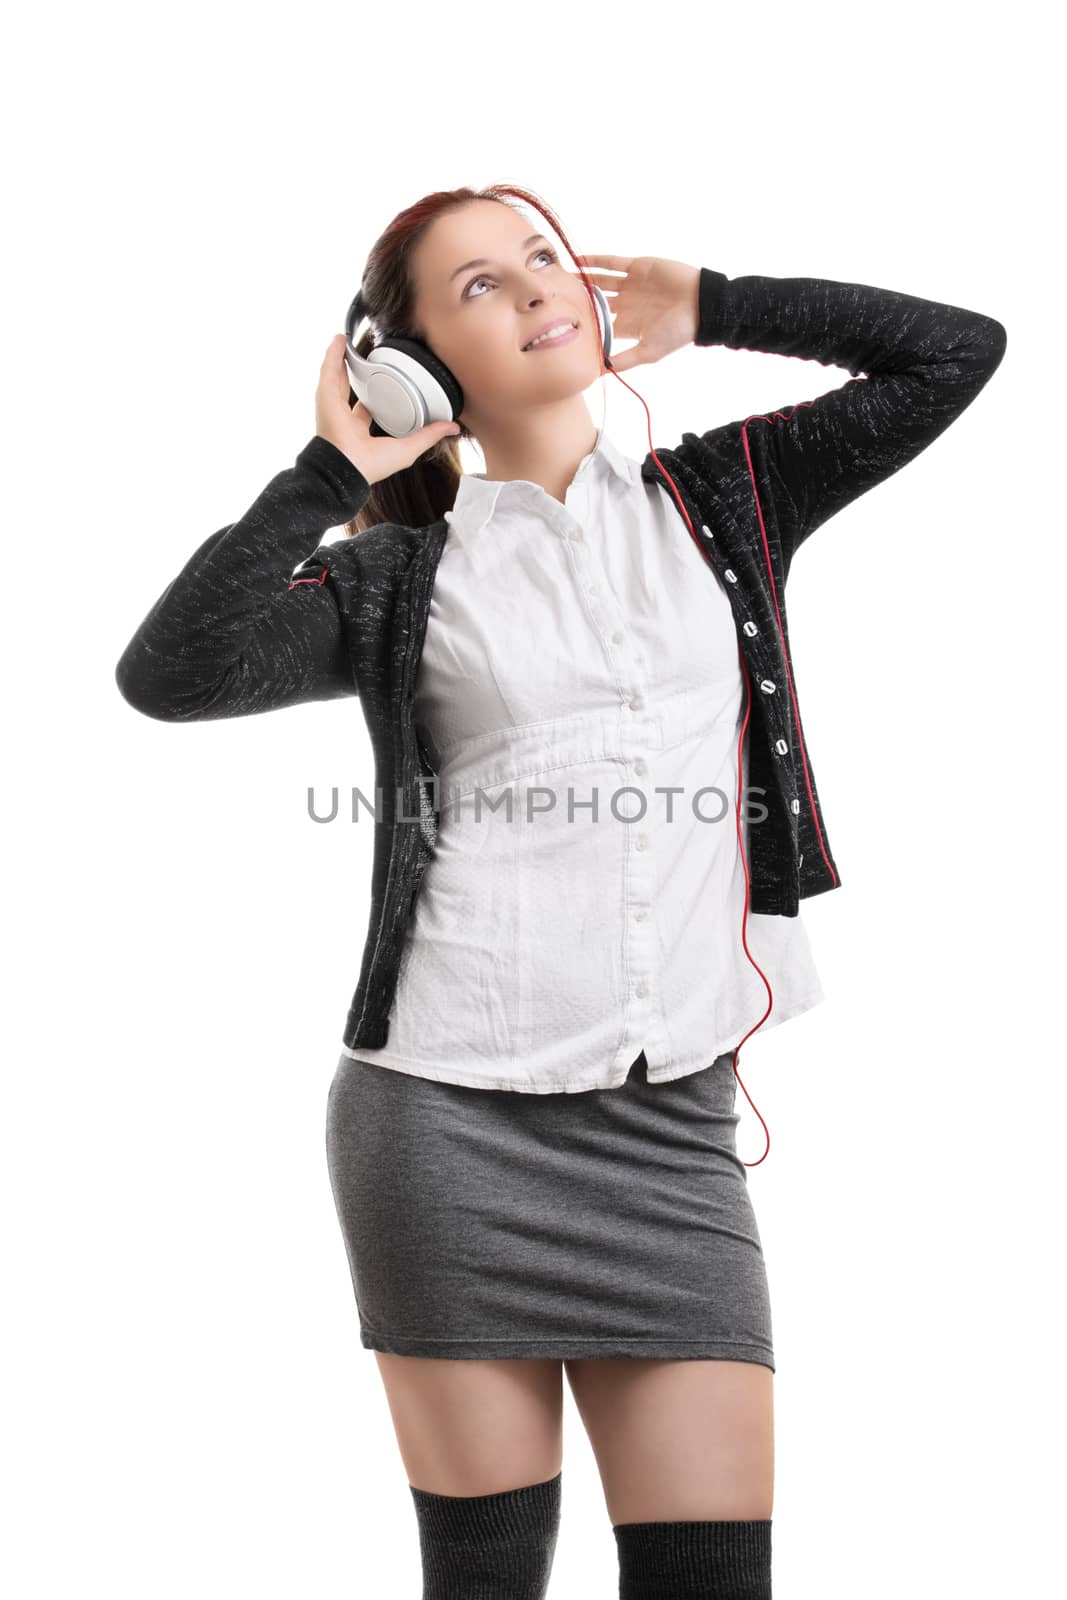 Young student girl with headphones listening to music by Mendelex